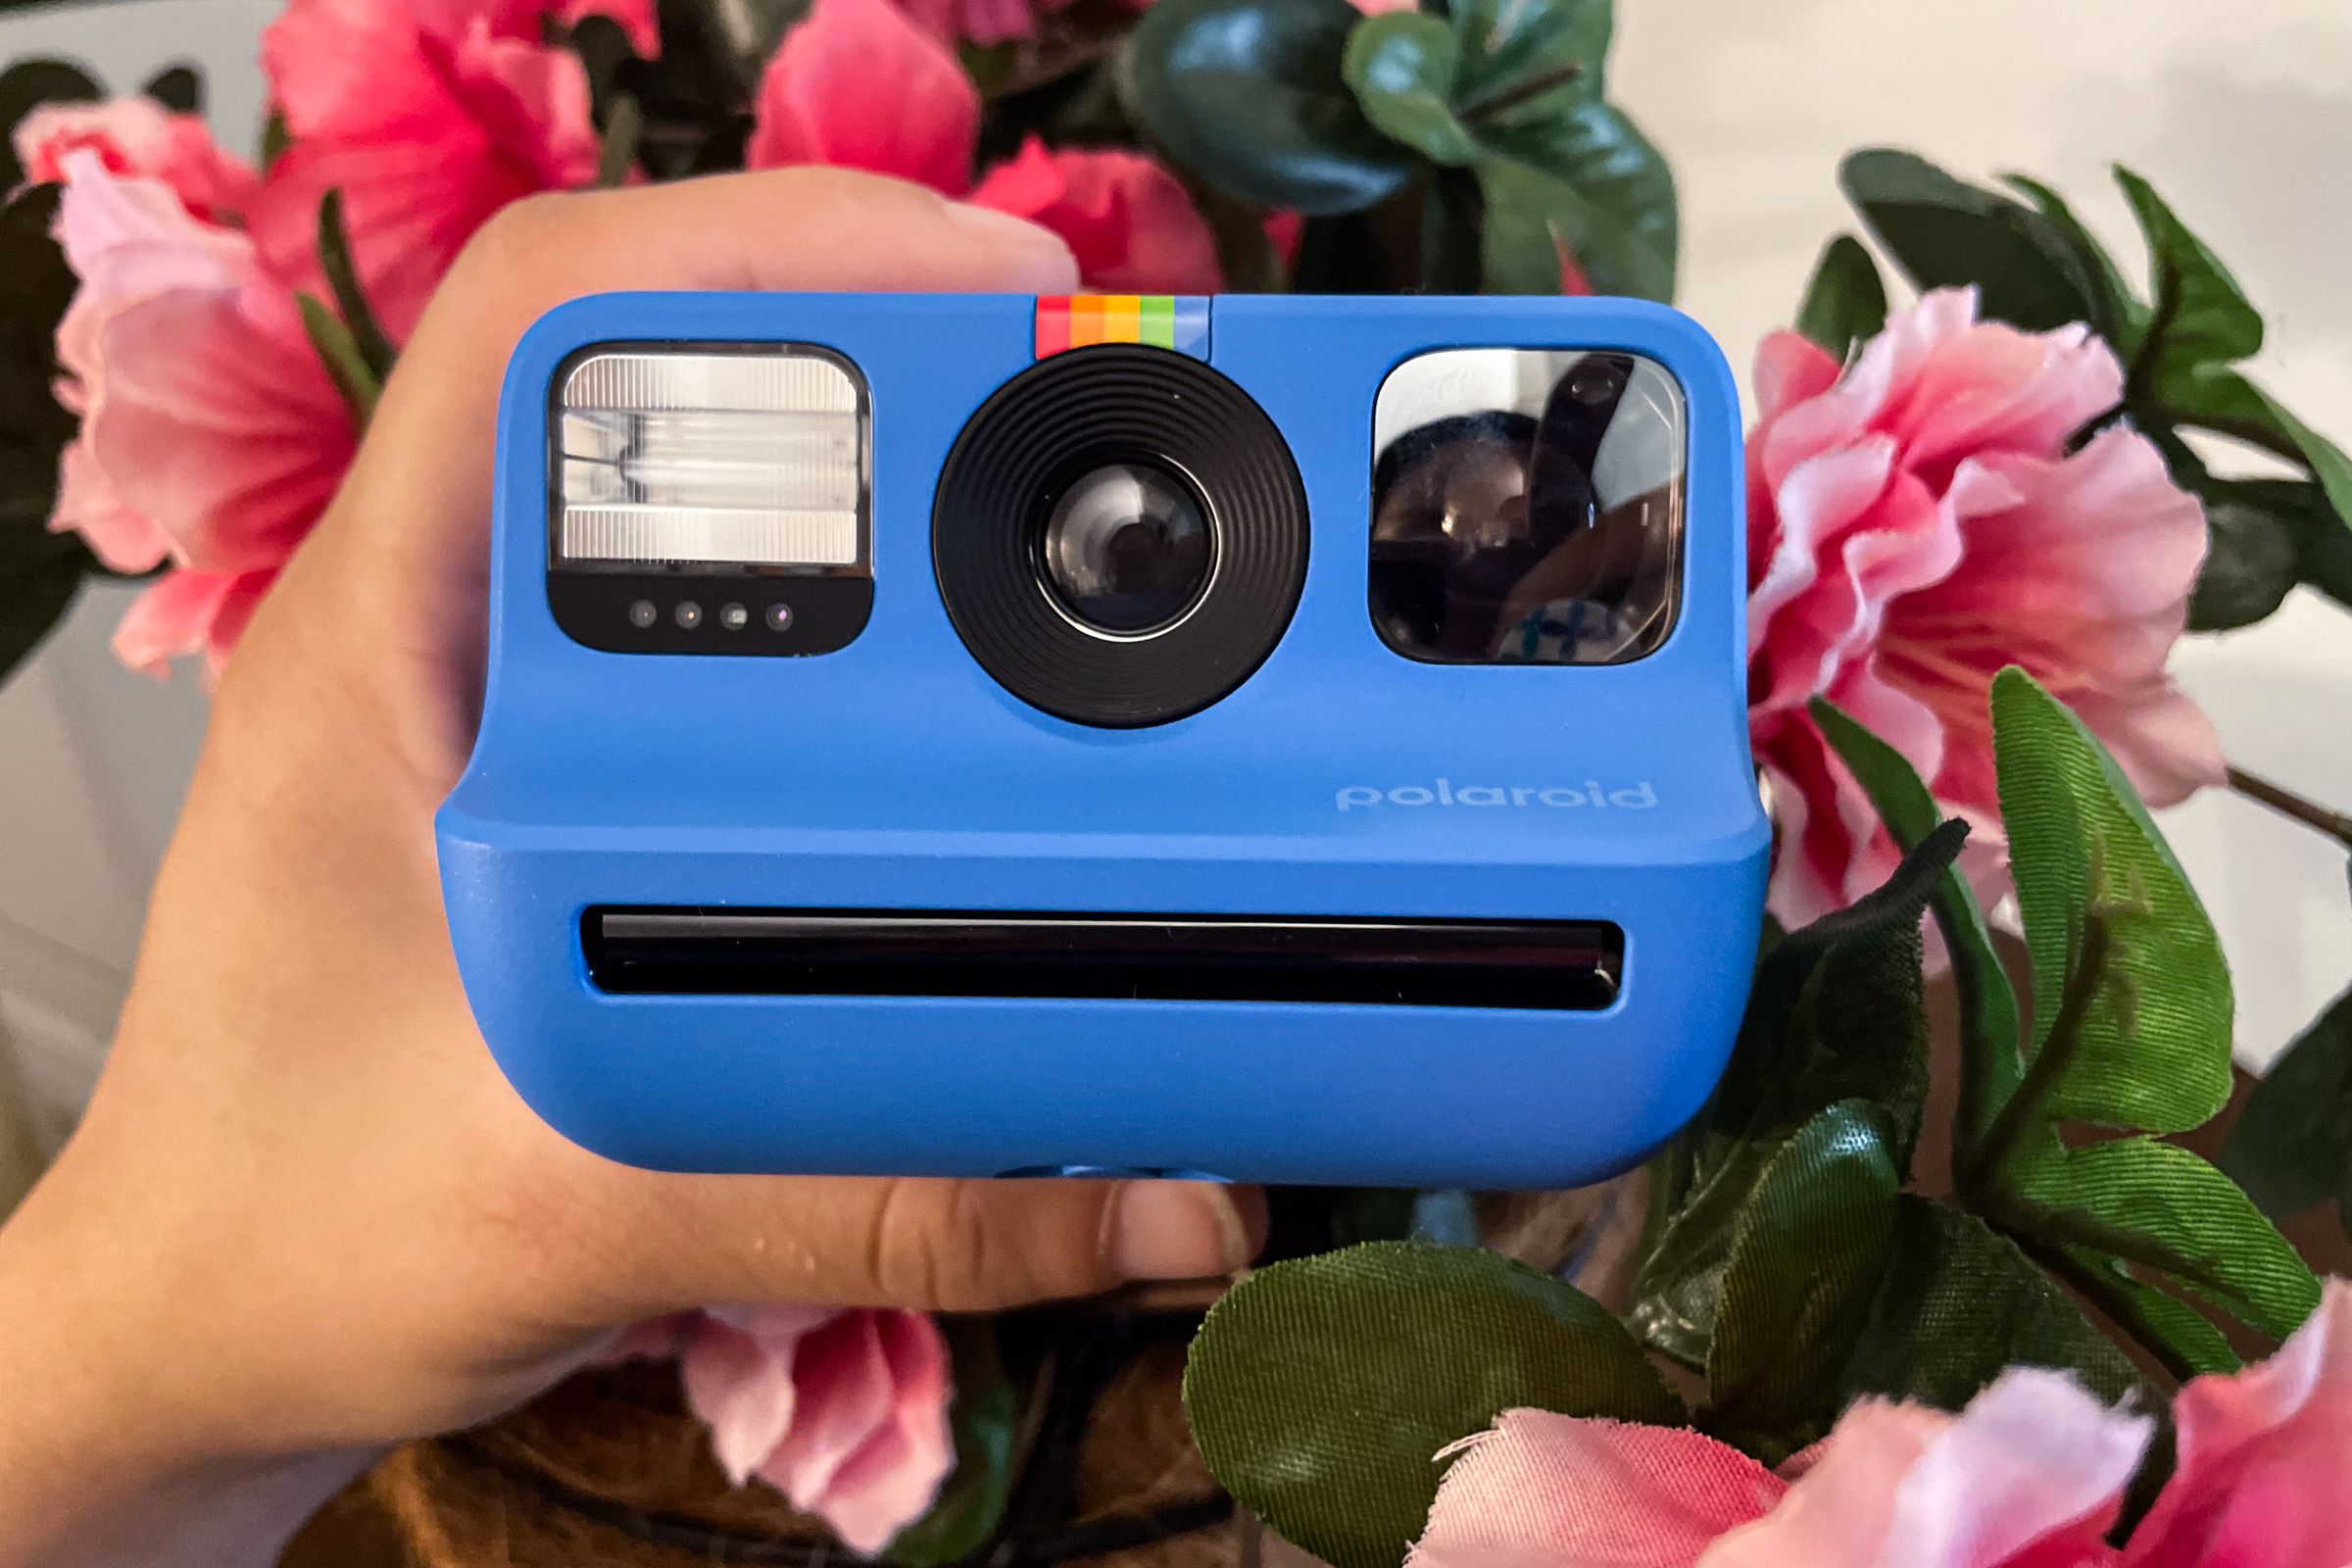 The Polaroid Go is easy to hold with one hand.